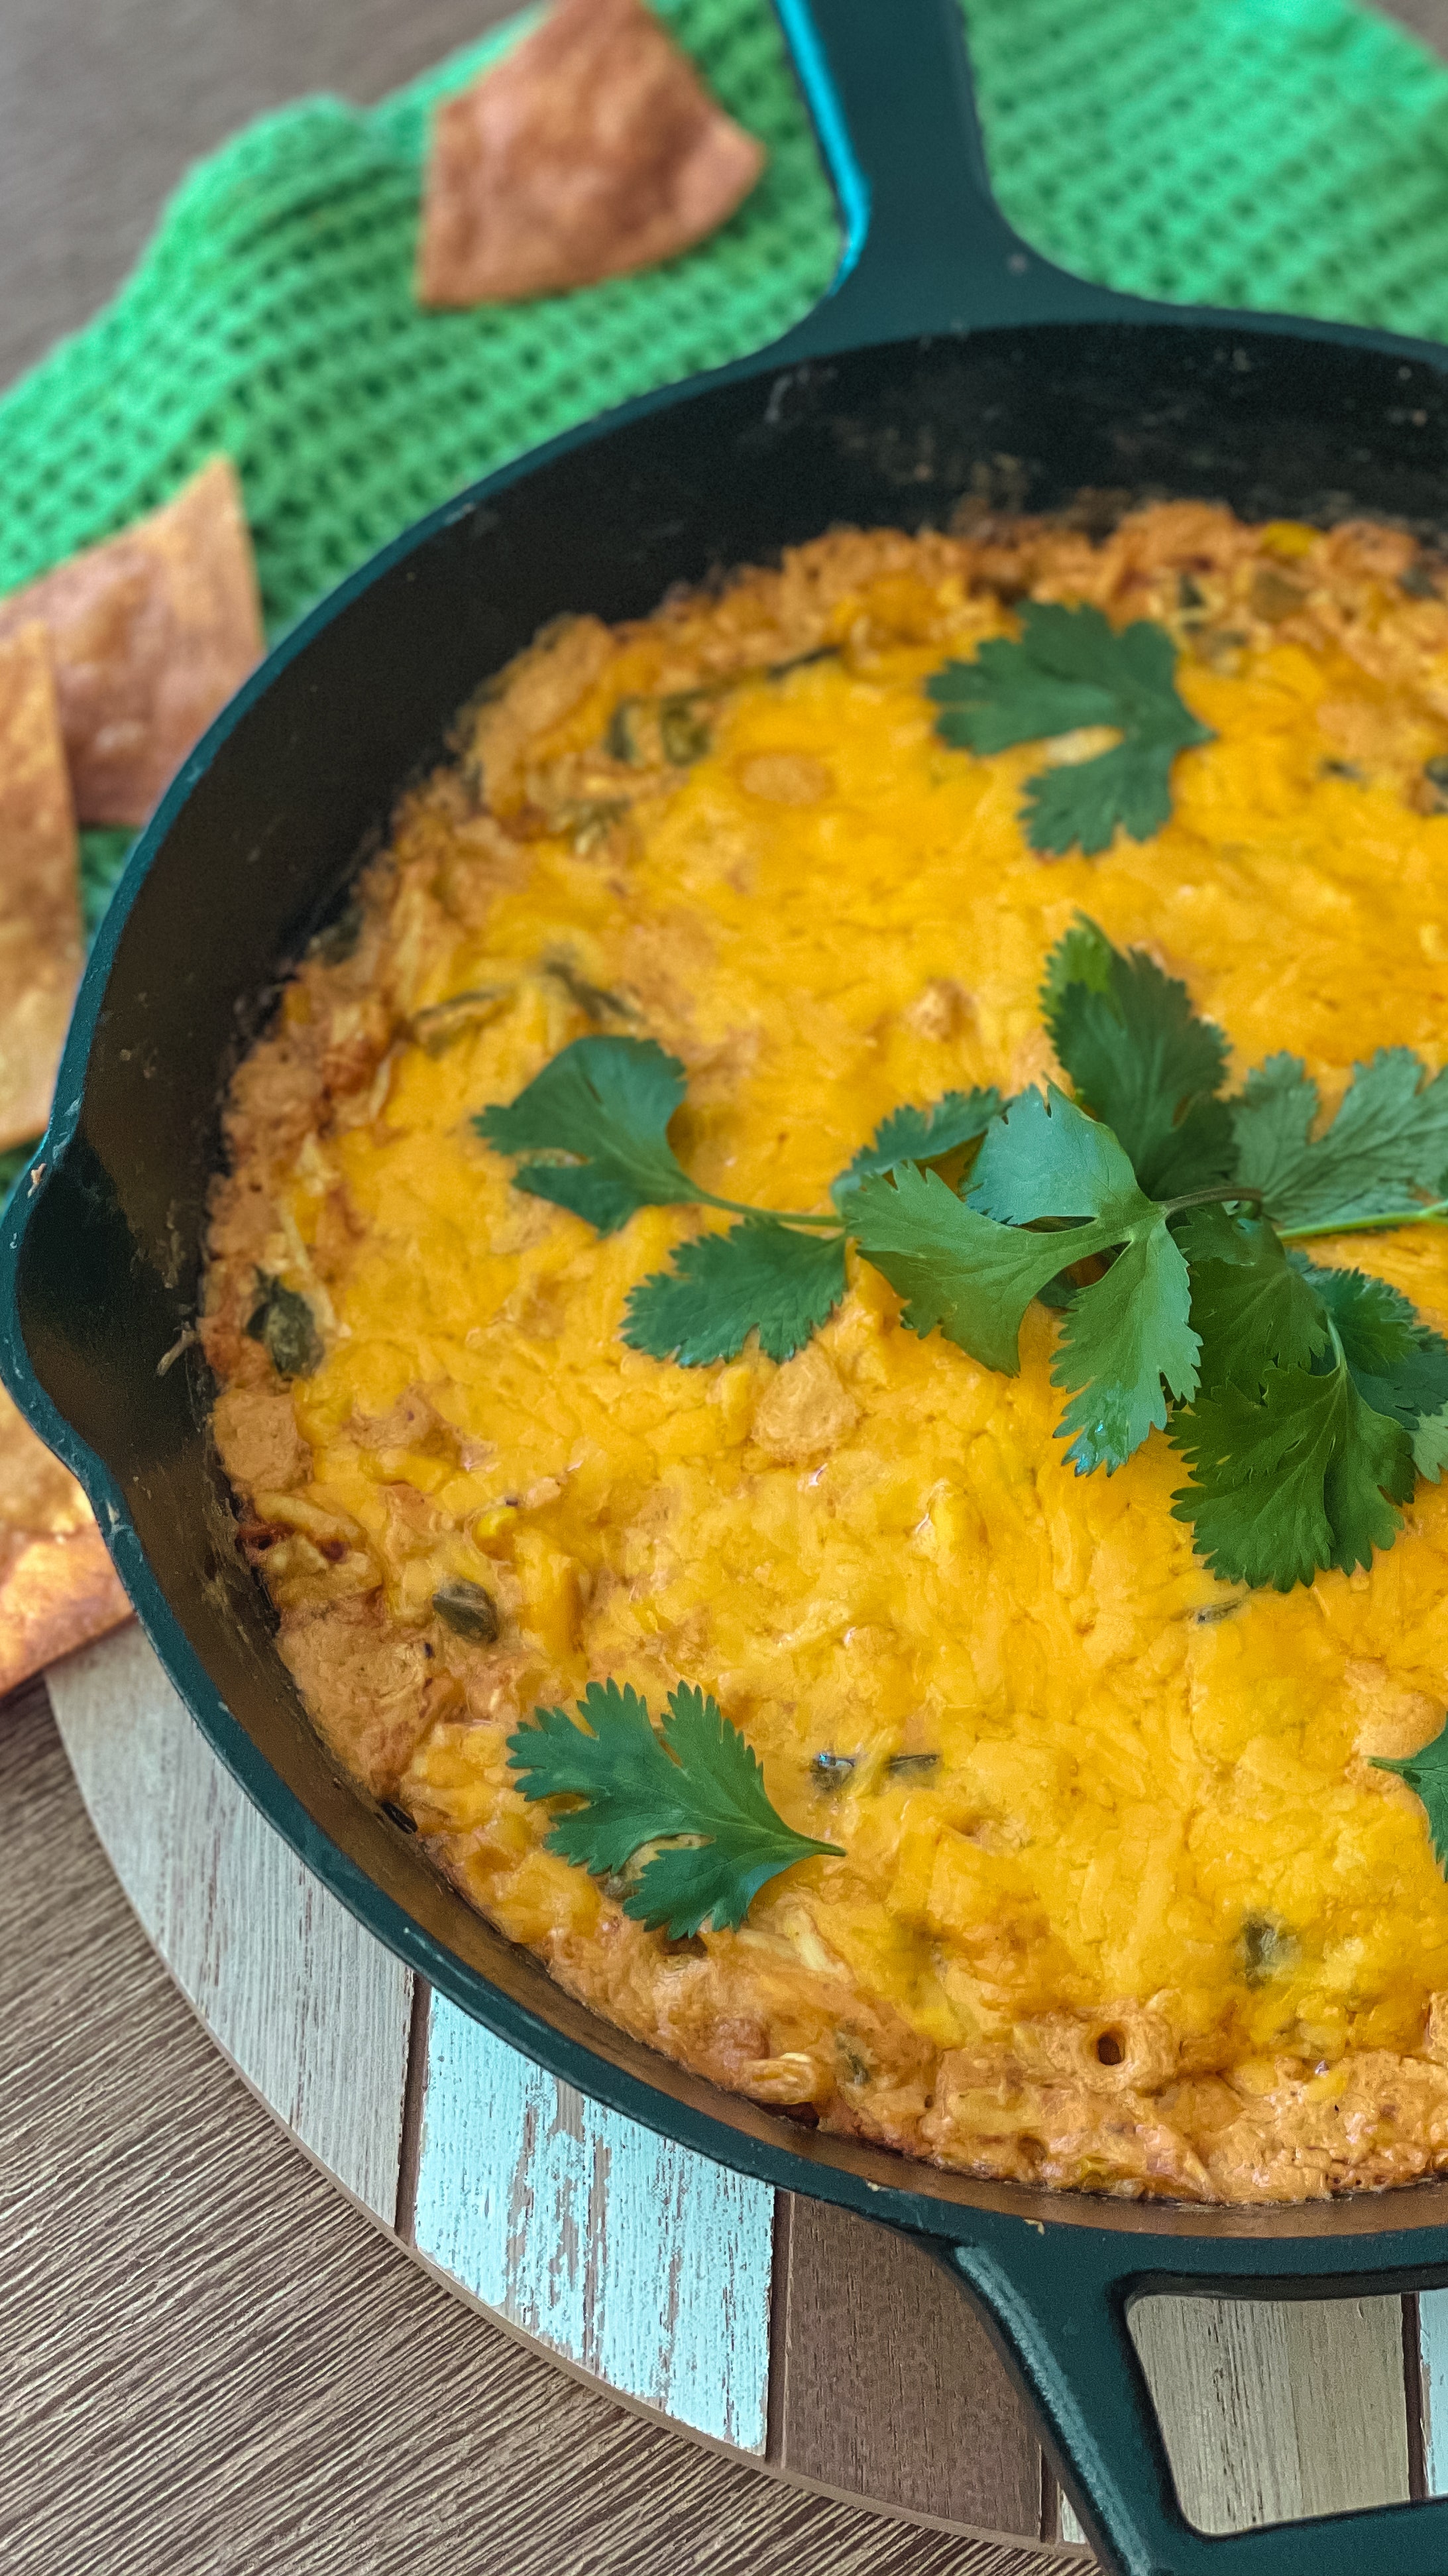 Buffalo chicken enchilada dip for NFL game day: Try the recipe